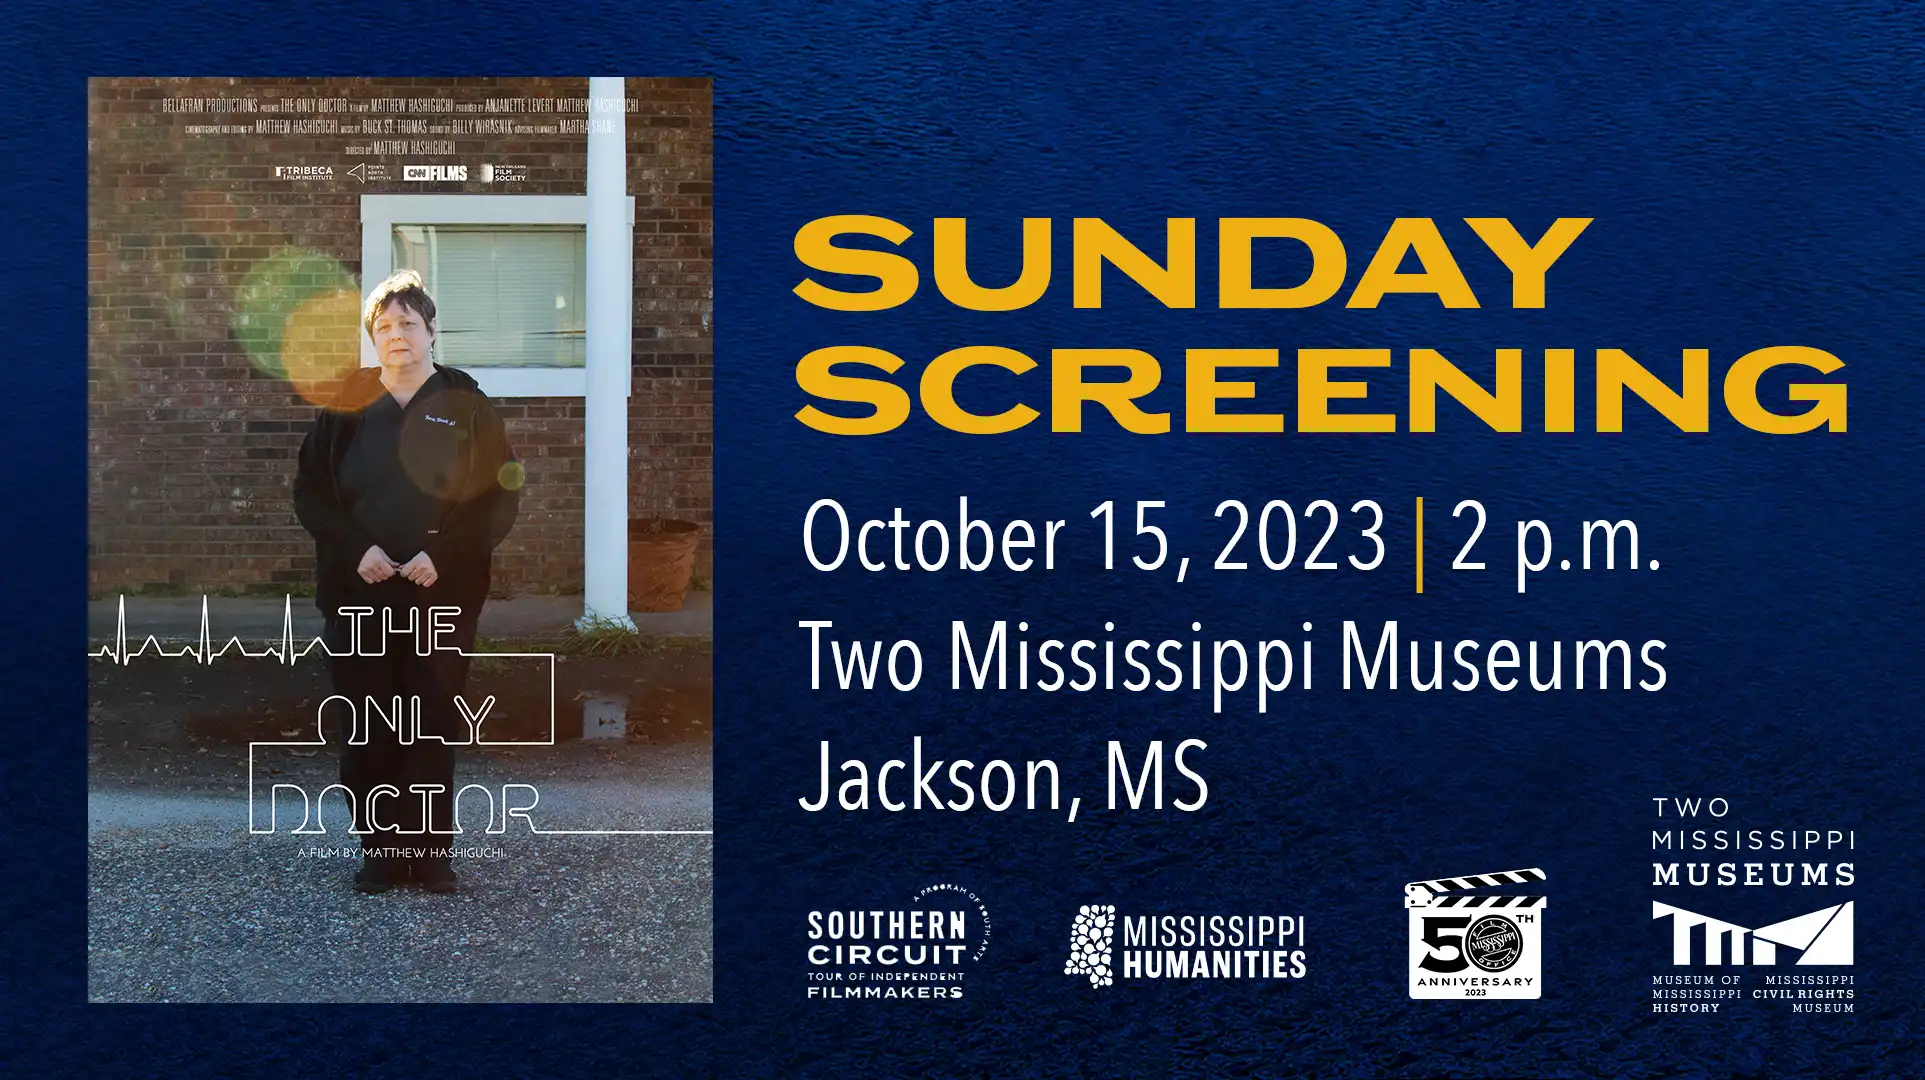 The Only Doctor - Sunday Screening - Oct. 15 2023